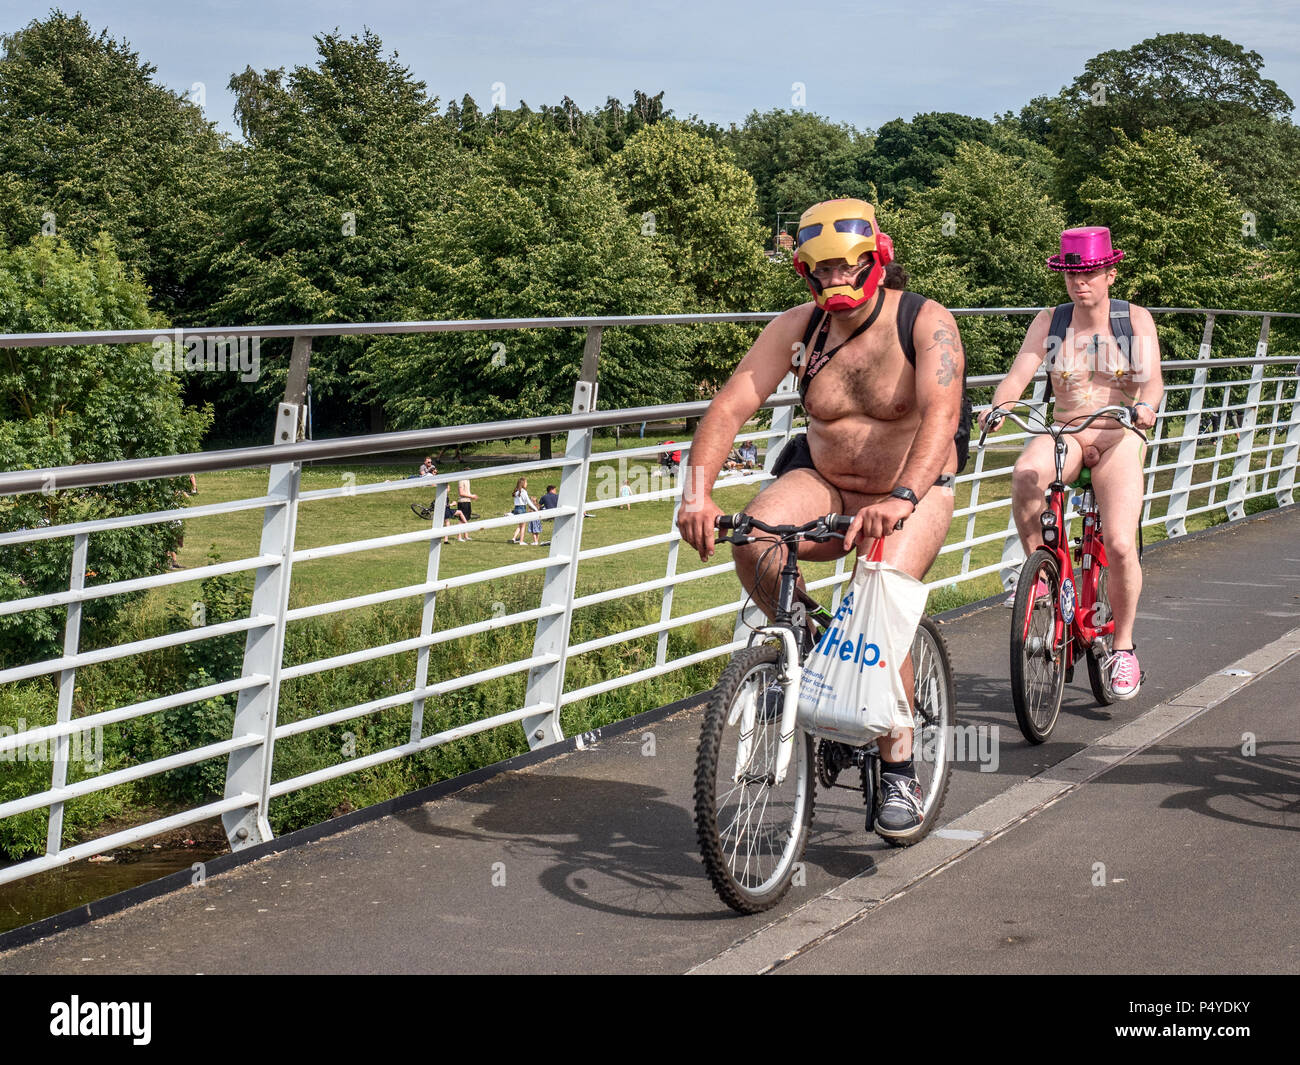 York, UK. 23rd June 2018. The thirteenth York World Naked Bike Ride leaving Millennium Bridge, a body positive event celebrating the bodies of cyclists, demonstrating vulnerability and requesting motorists see cyclists when they're not naked. Credit: Mark Sunderland/Alamy Live News Stock Photo